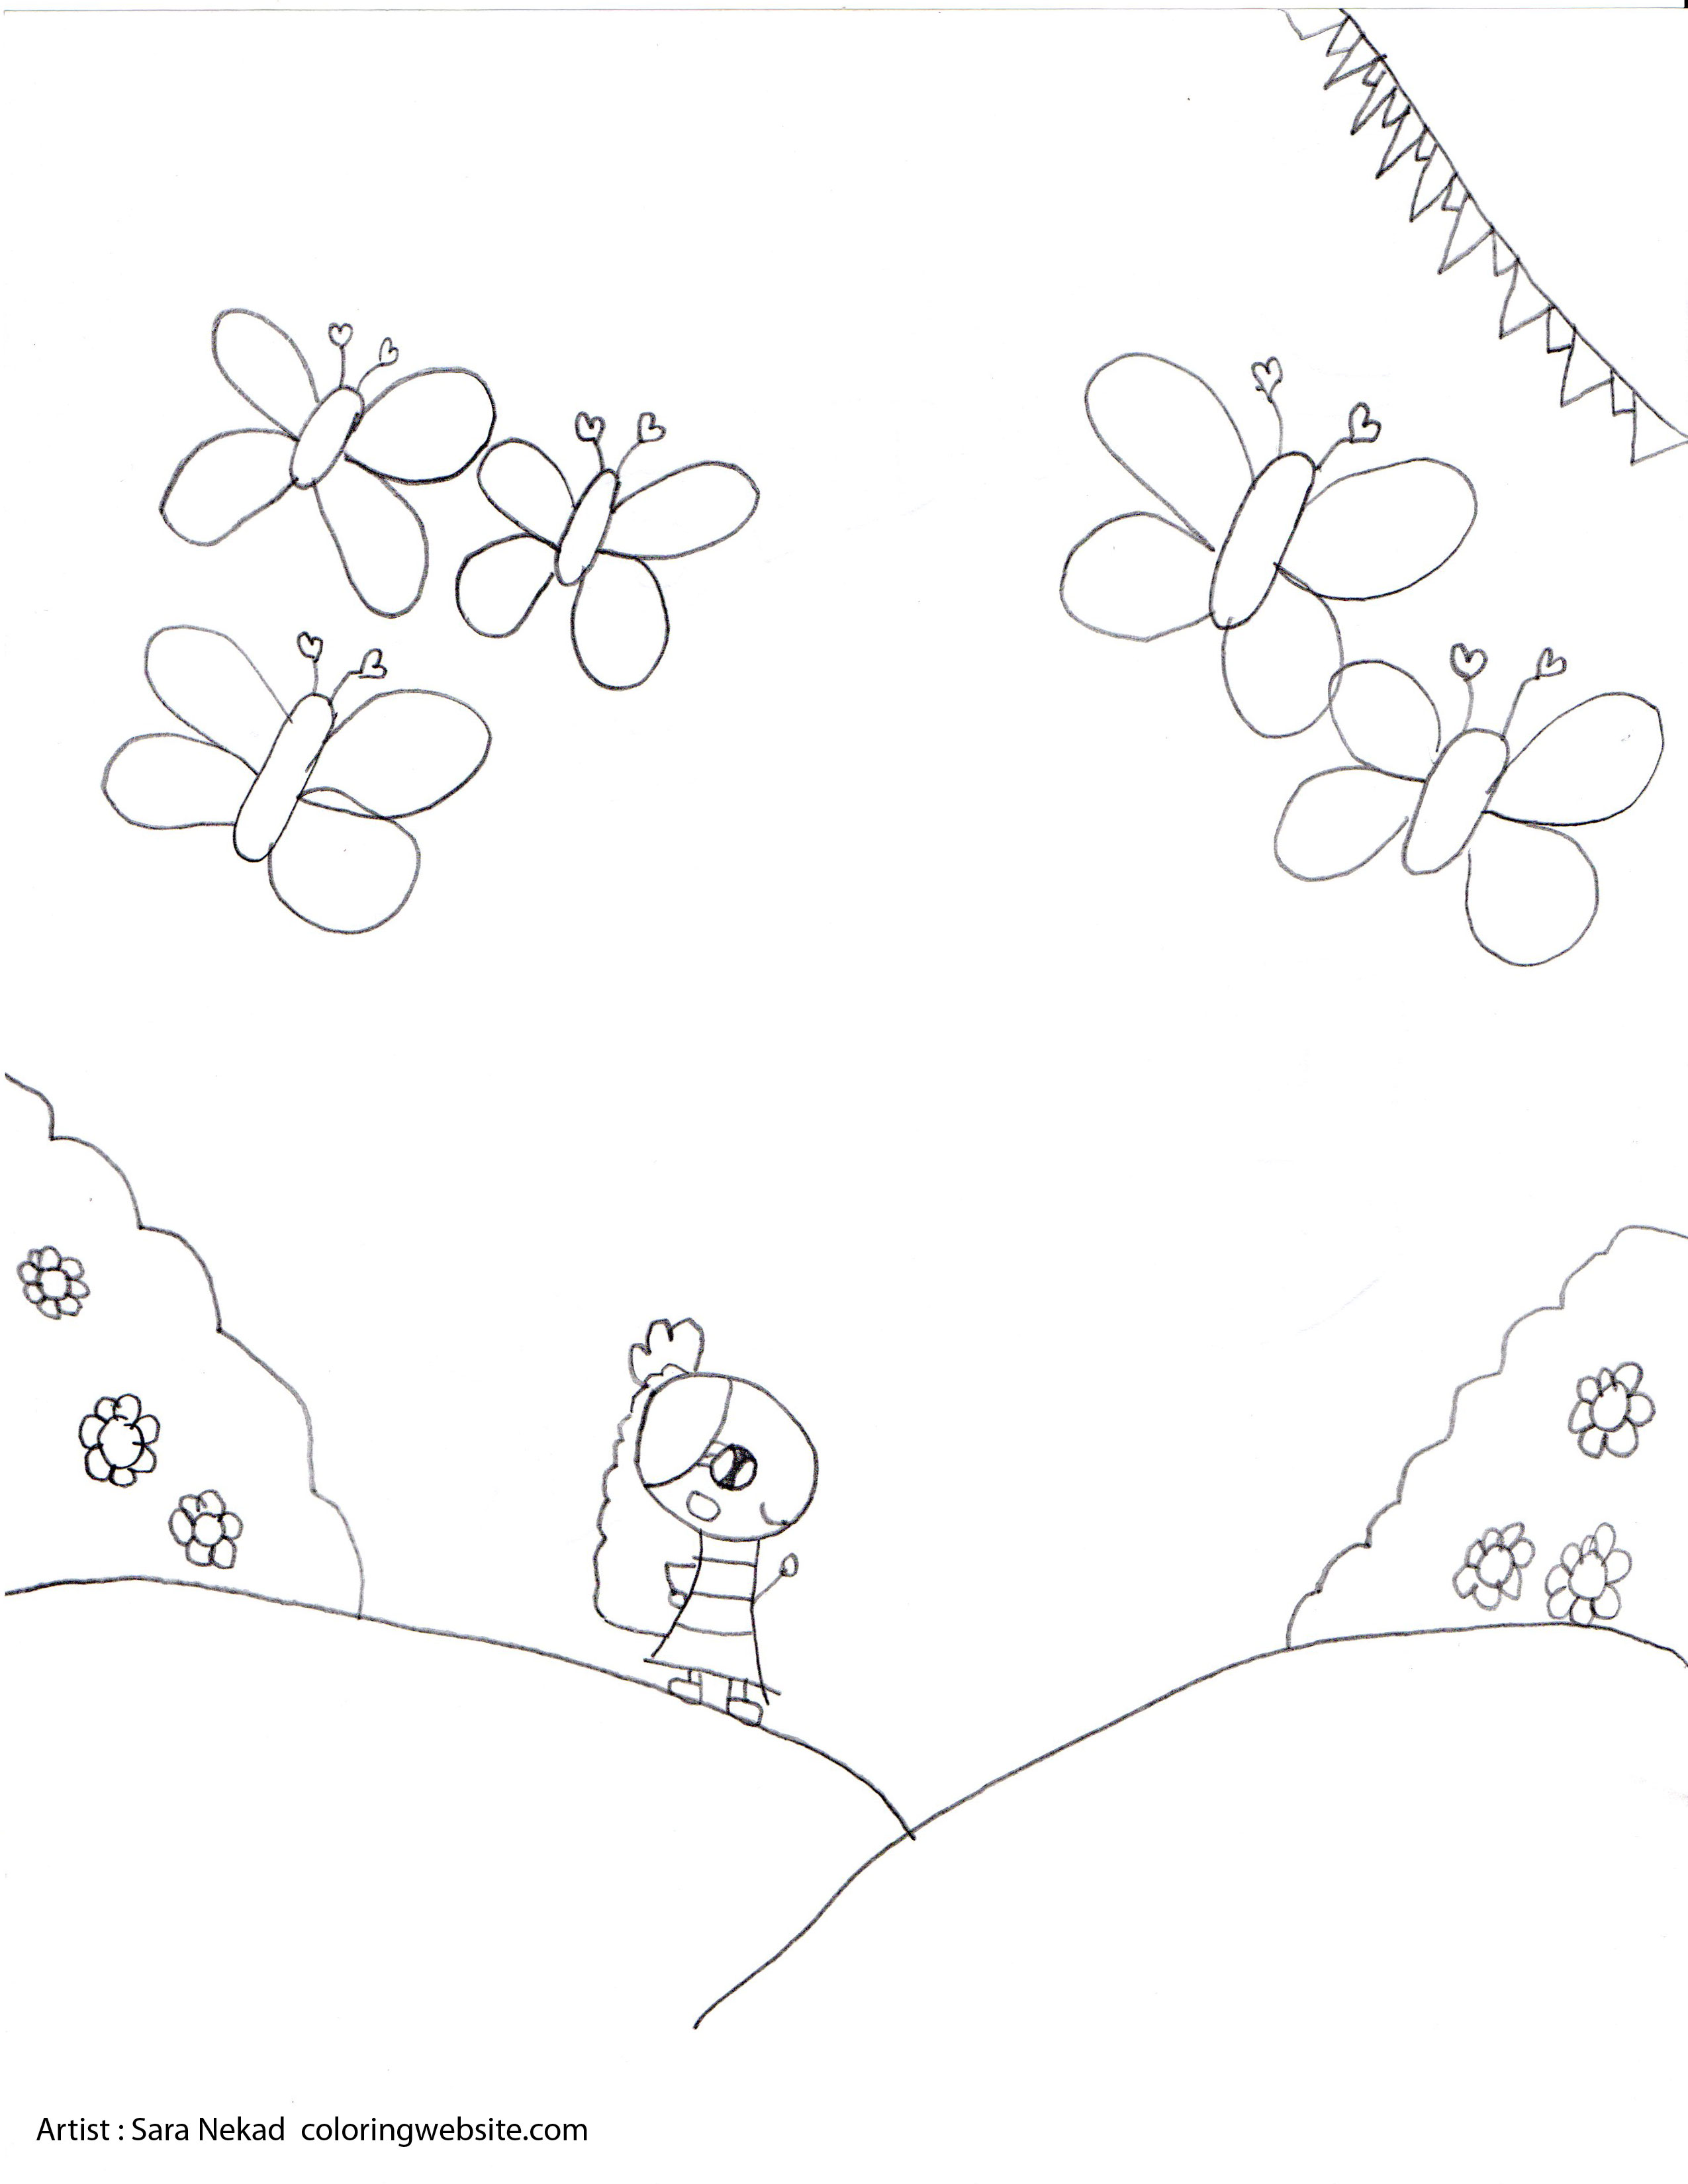 Coloring Website - Free Coloring Pages for Kids